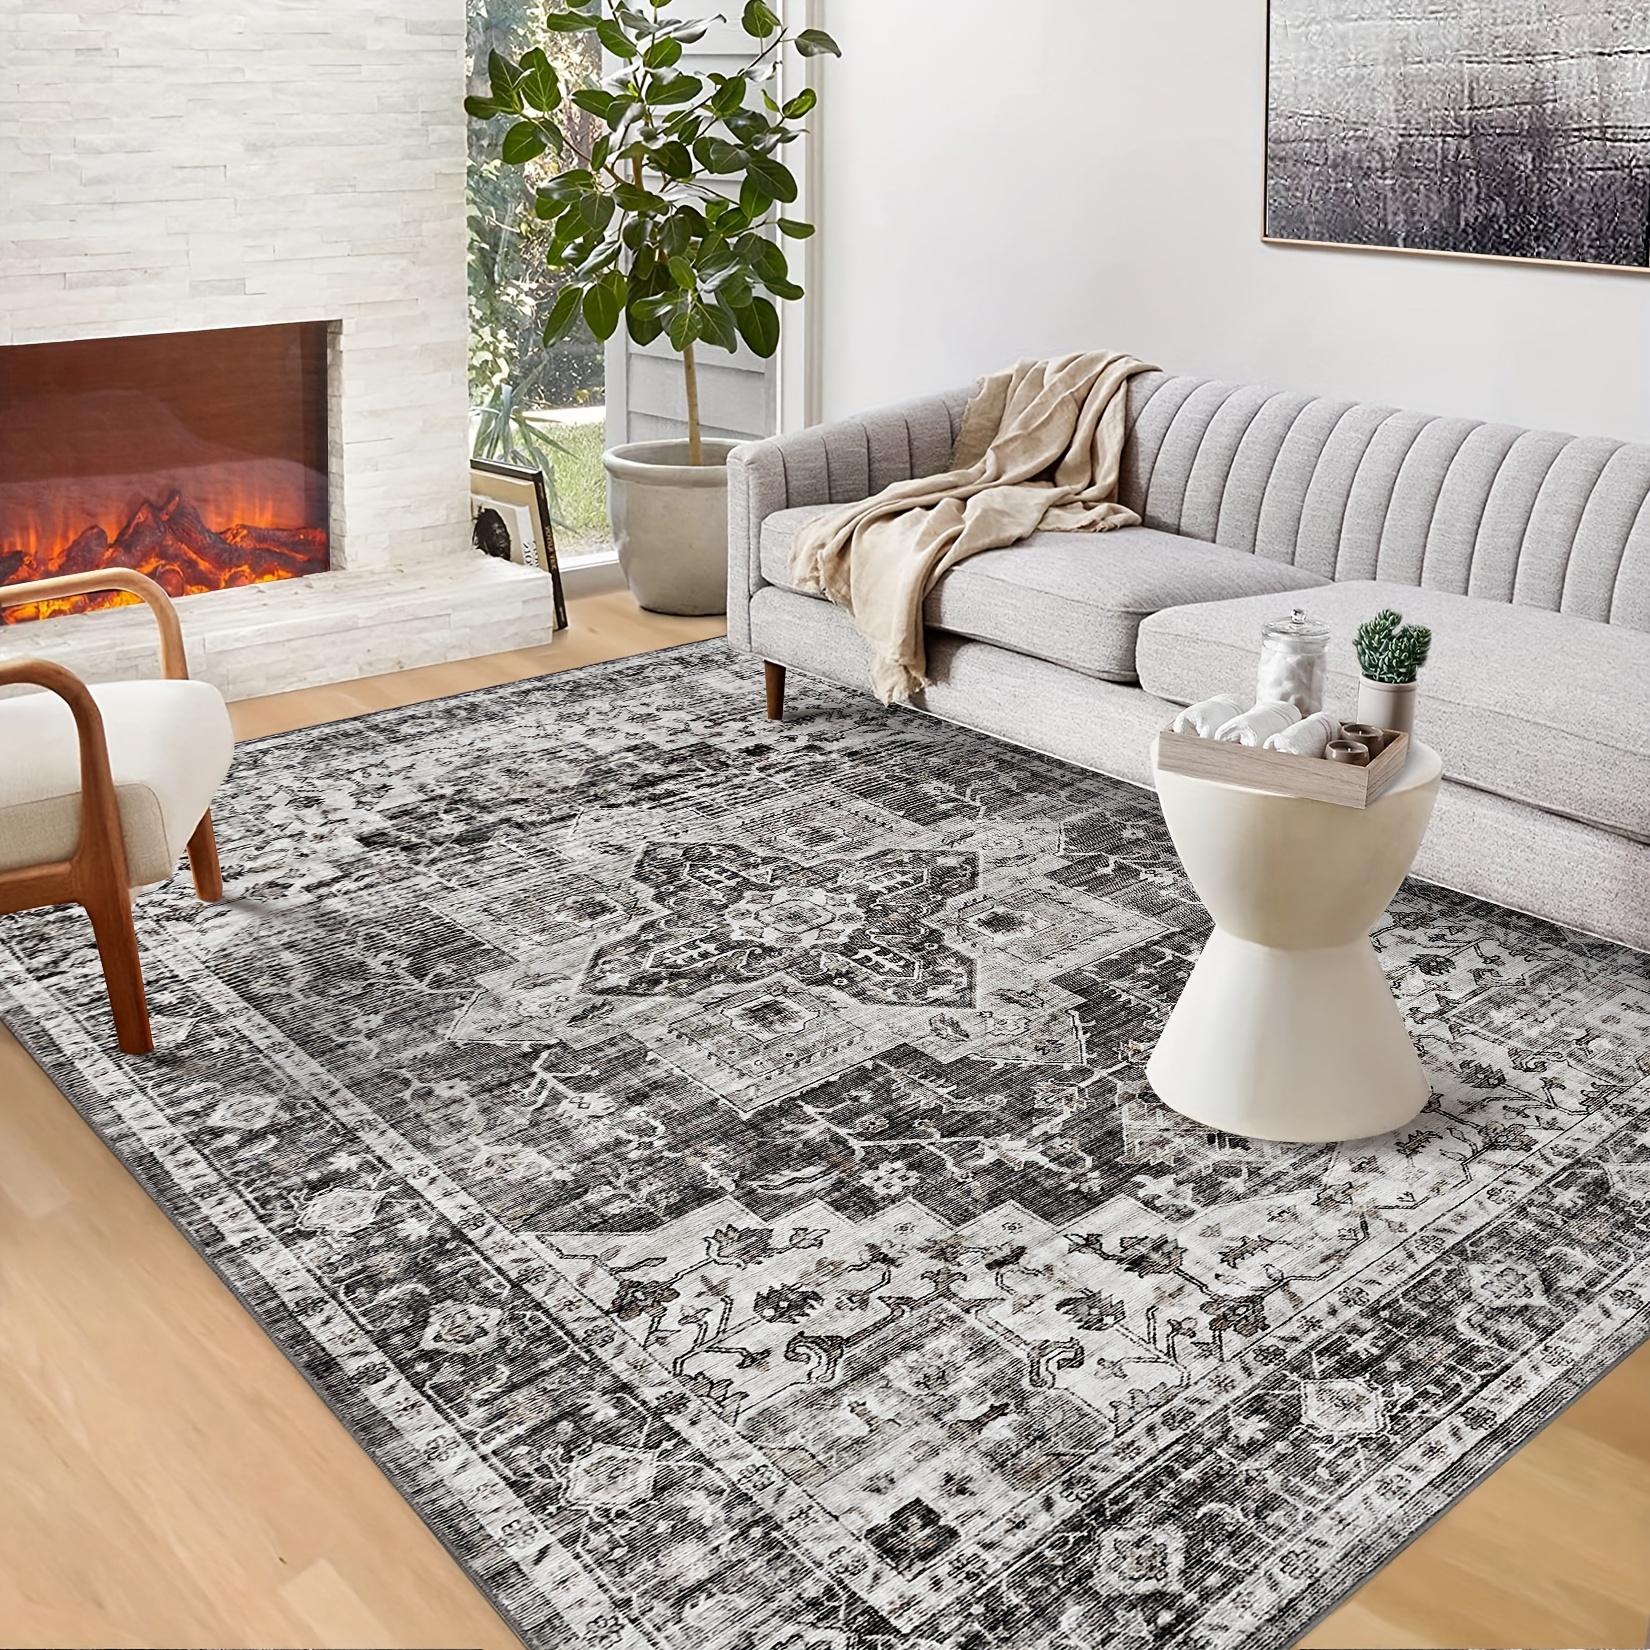 

1pc Machine Washable Rug Vintage Design Area Rugs With Non Slip Large Rugs For Living Room Bedroom Floral Print Rug Carpet Stain Resistant, Grey